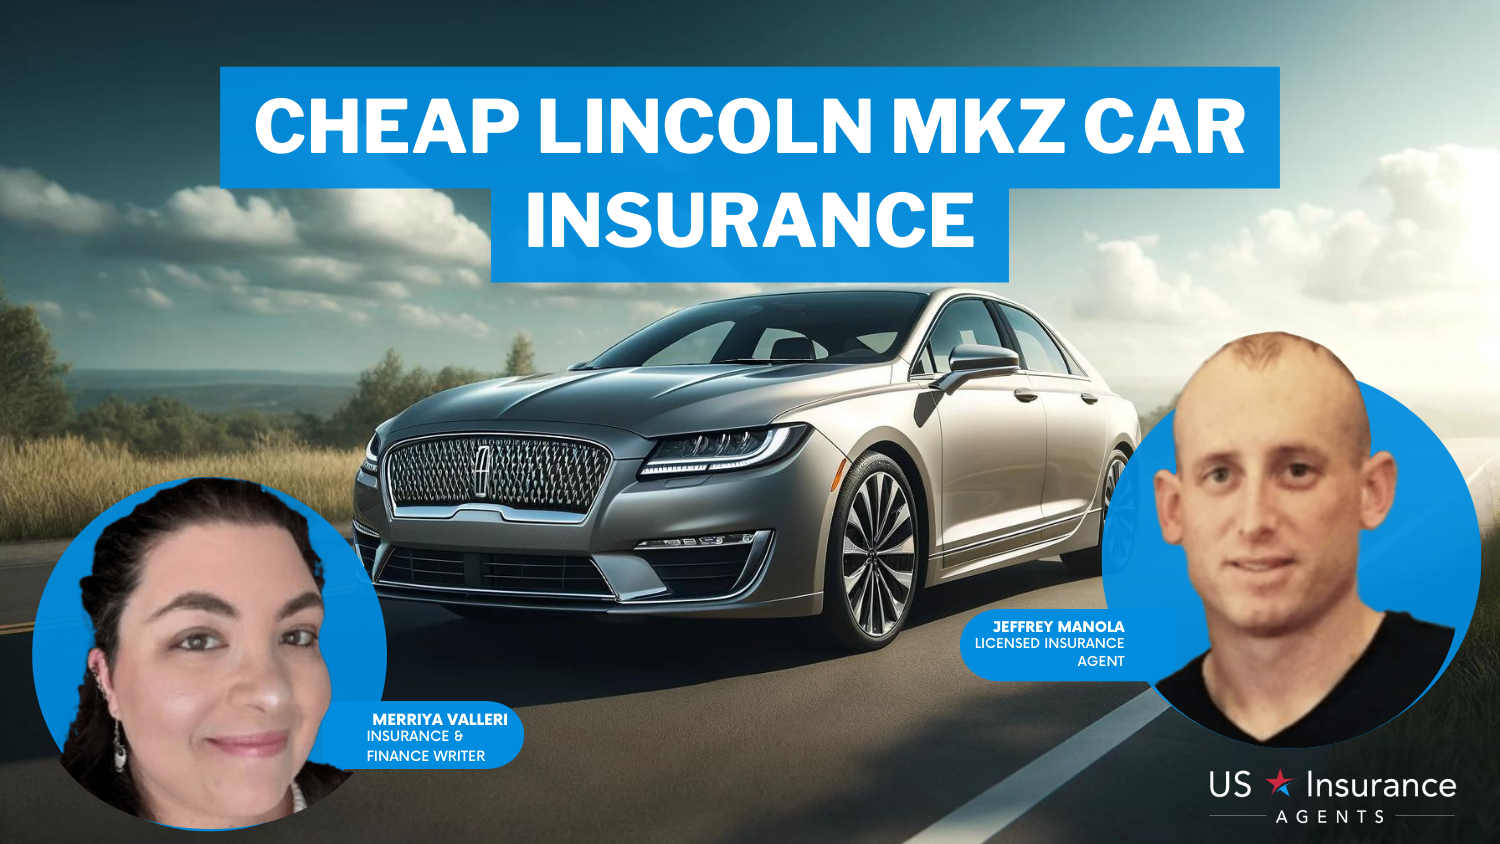 Cheap Lincoln MKZ Car Insurance: State Farm, Erie, and American Family